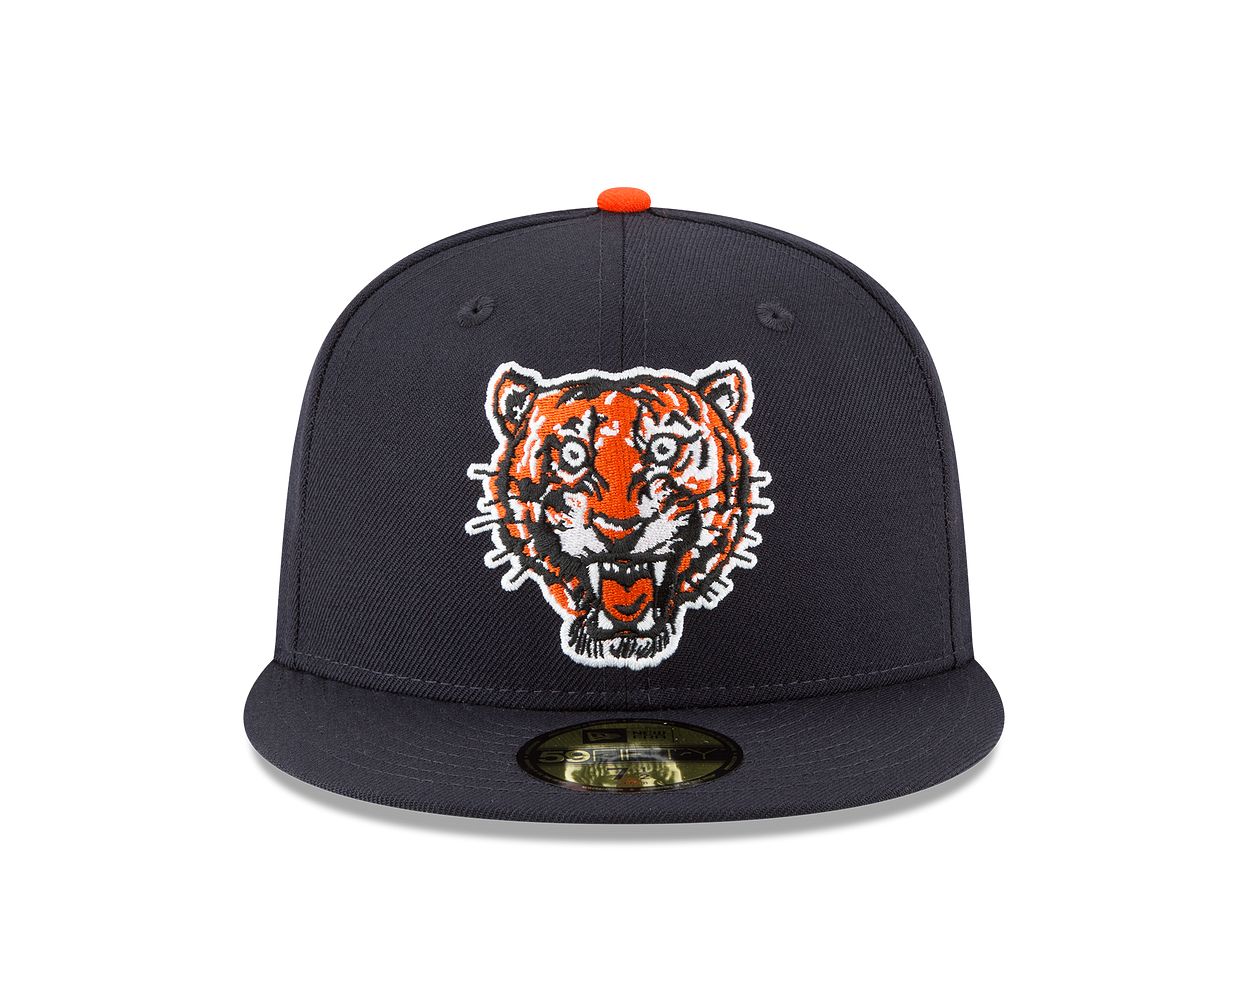 New Era Detroit Tigers Navy Cooperstown Collection Wool 59FIFTY Fitted Hat